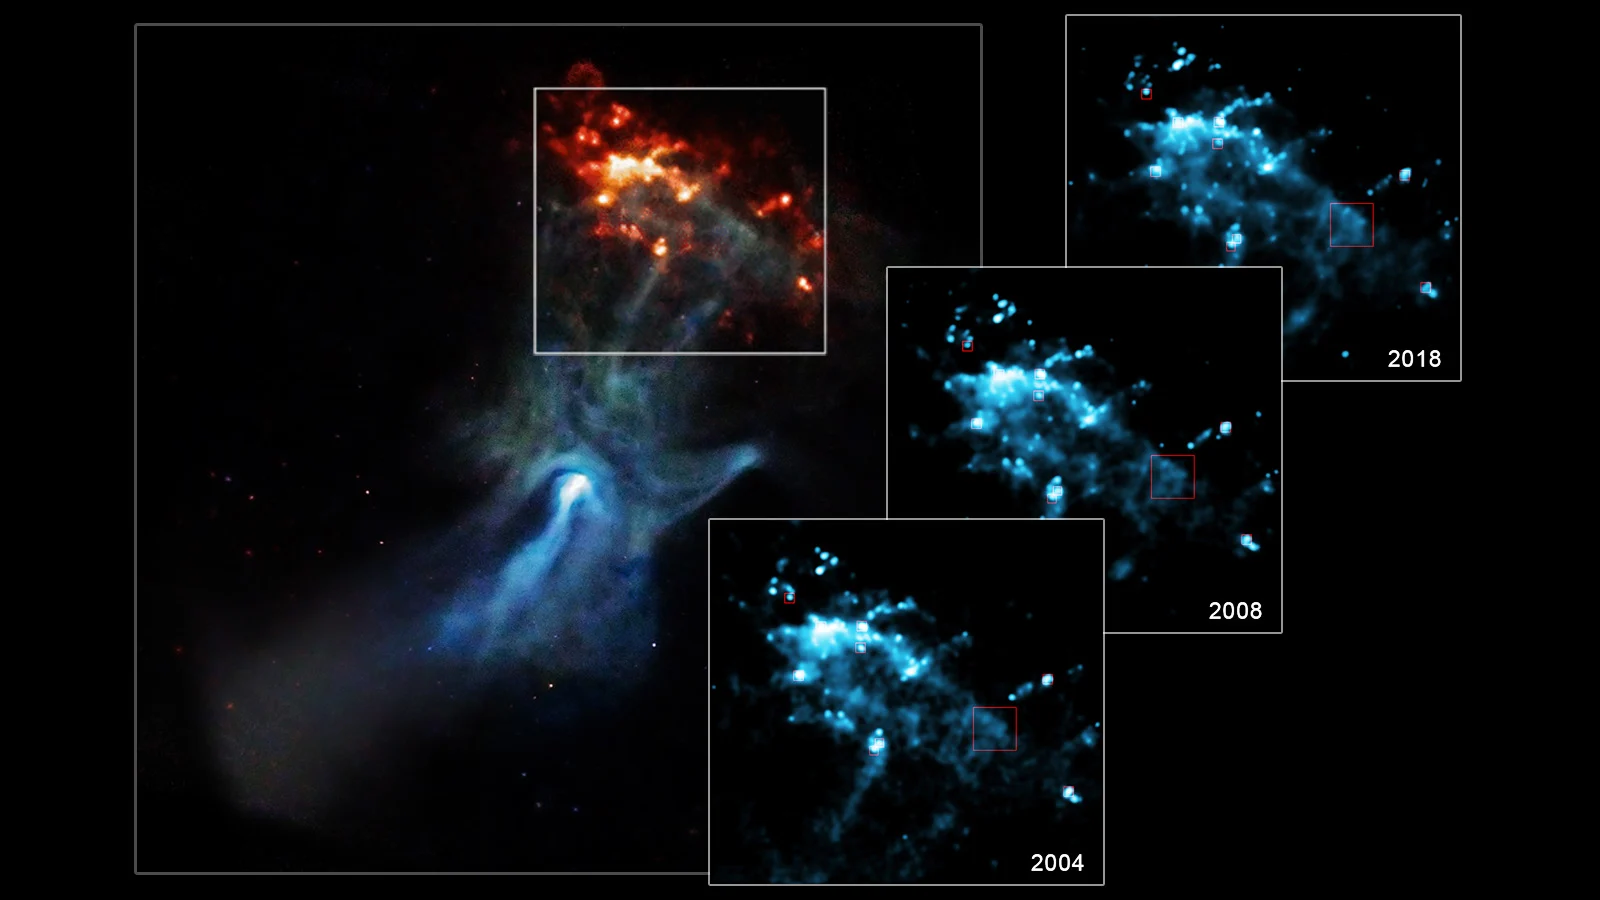 New views of spectral 'cosmic hand' show it reaching out into space